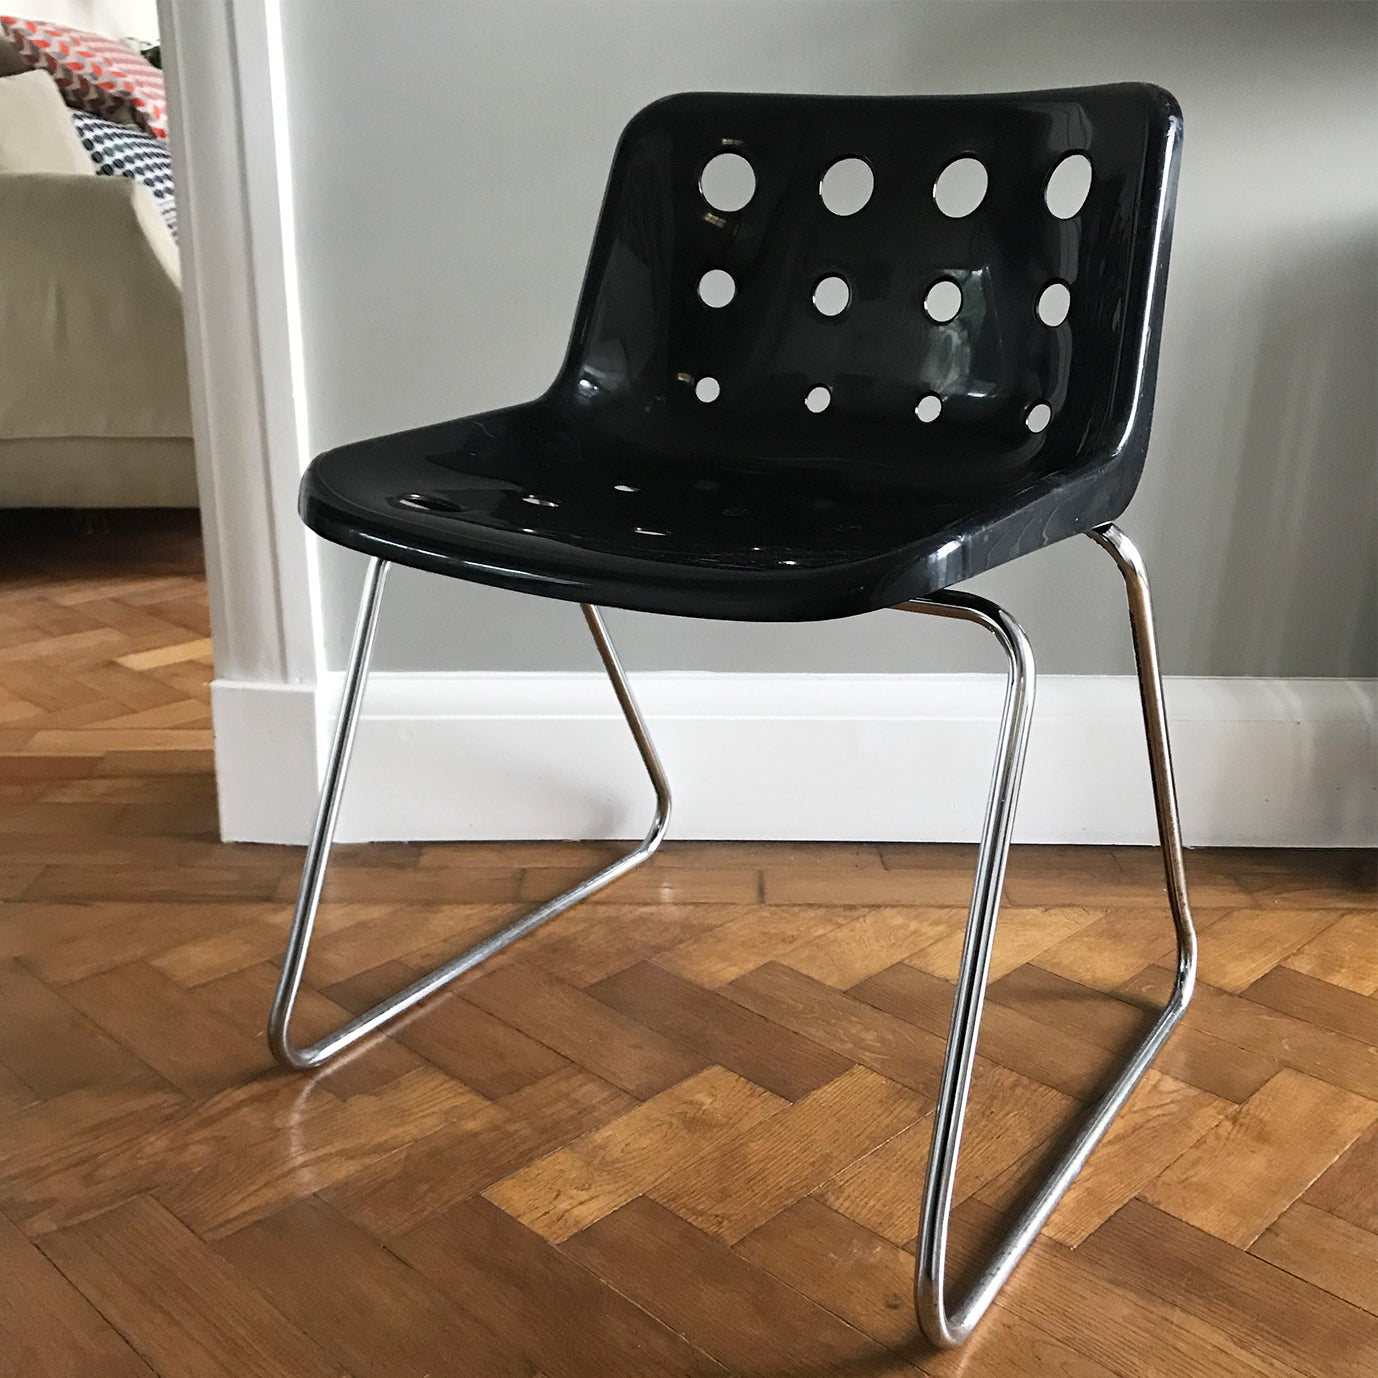 Original Robin Day for Hille of London ‘Polo’ chair designed in 1975 with chromed steel rod skid base and pierced polypropylene shell-black seat - SHOP NOW - www.intovintage.co.uk